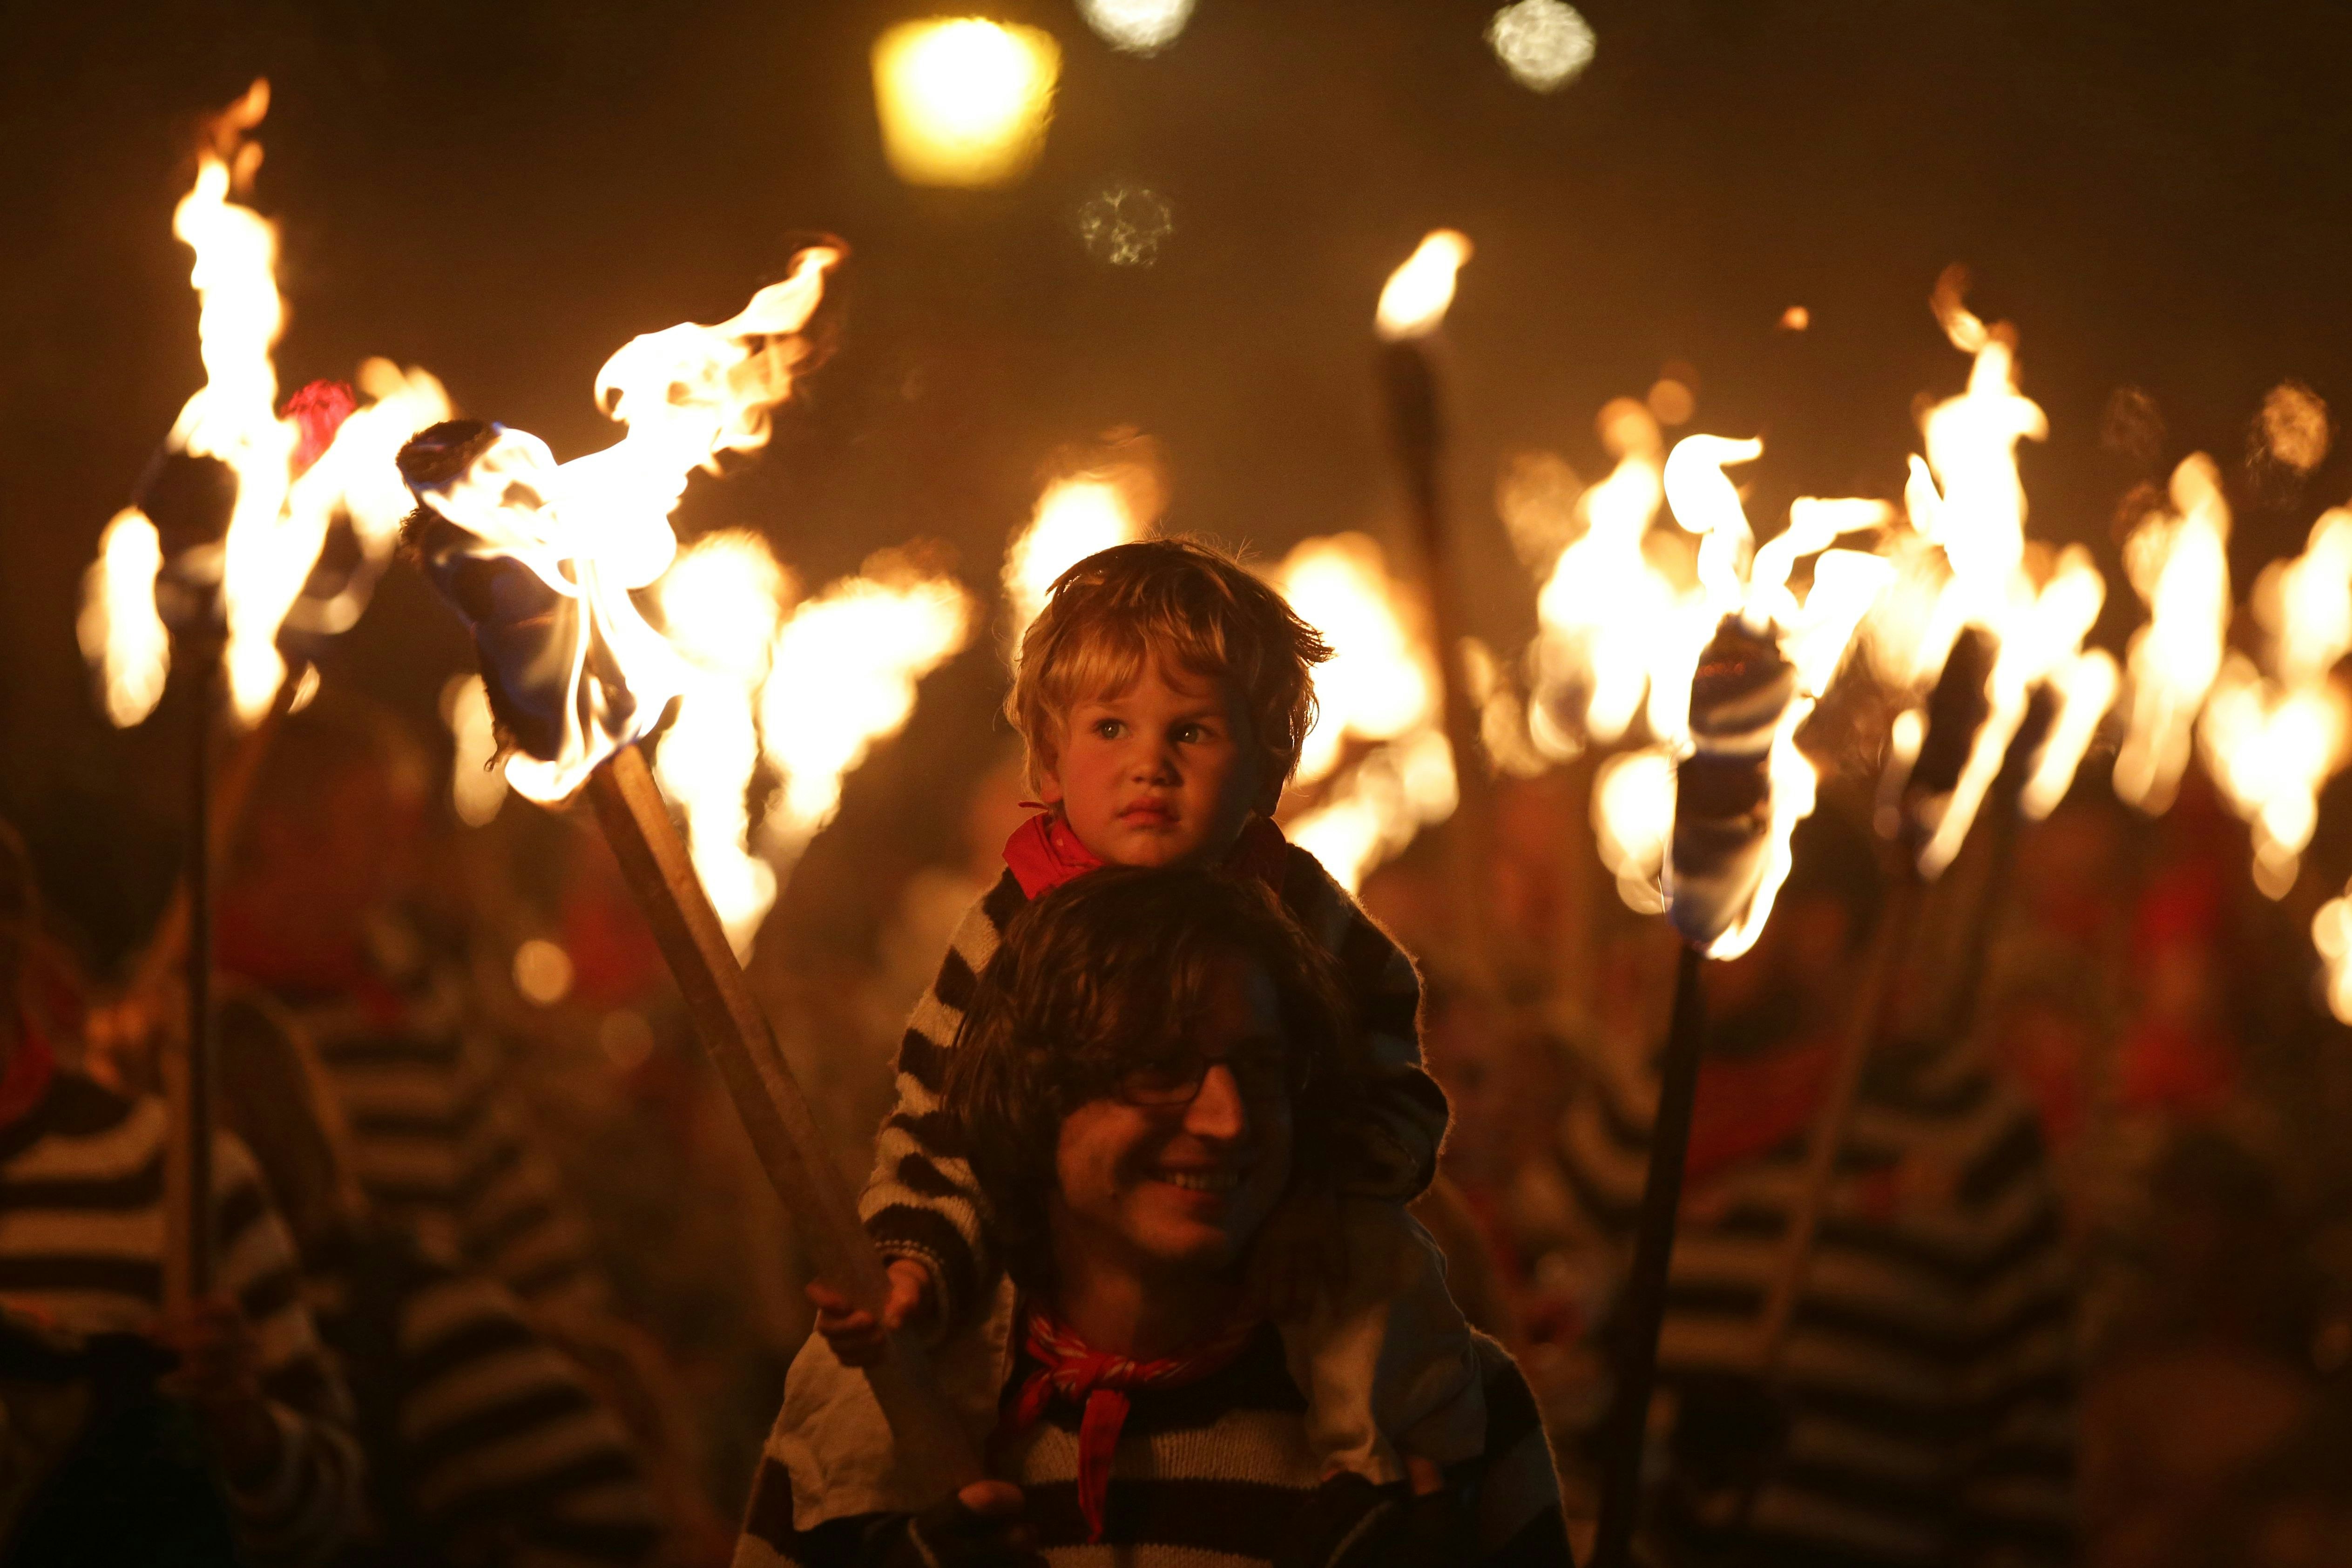 A child on an adult's shoulders holds a flaming torch. Everyone in the crowd is dressed in black and white stripes with a red neckerchief, and many are waving flaming torches